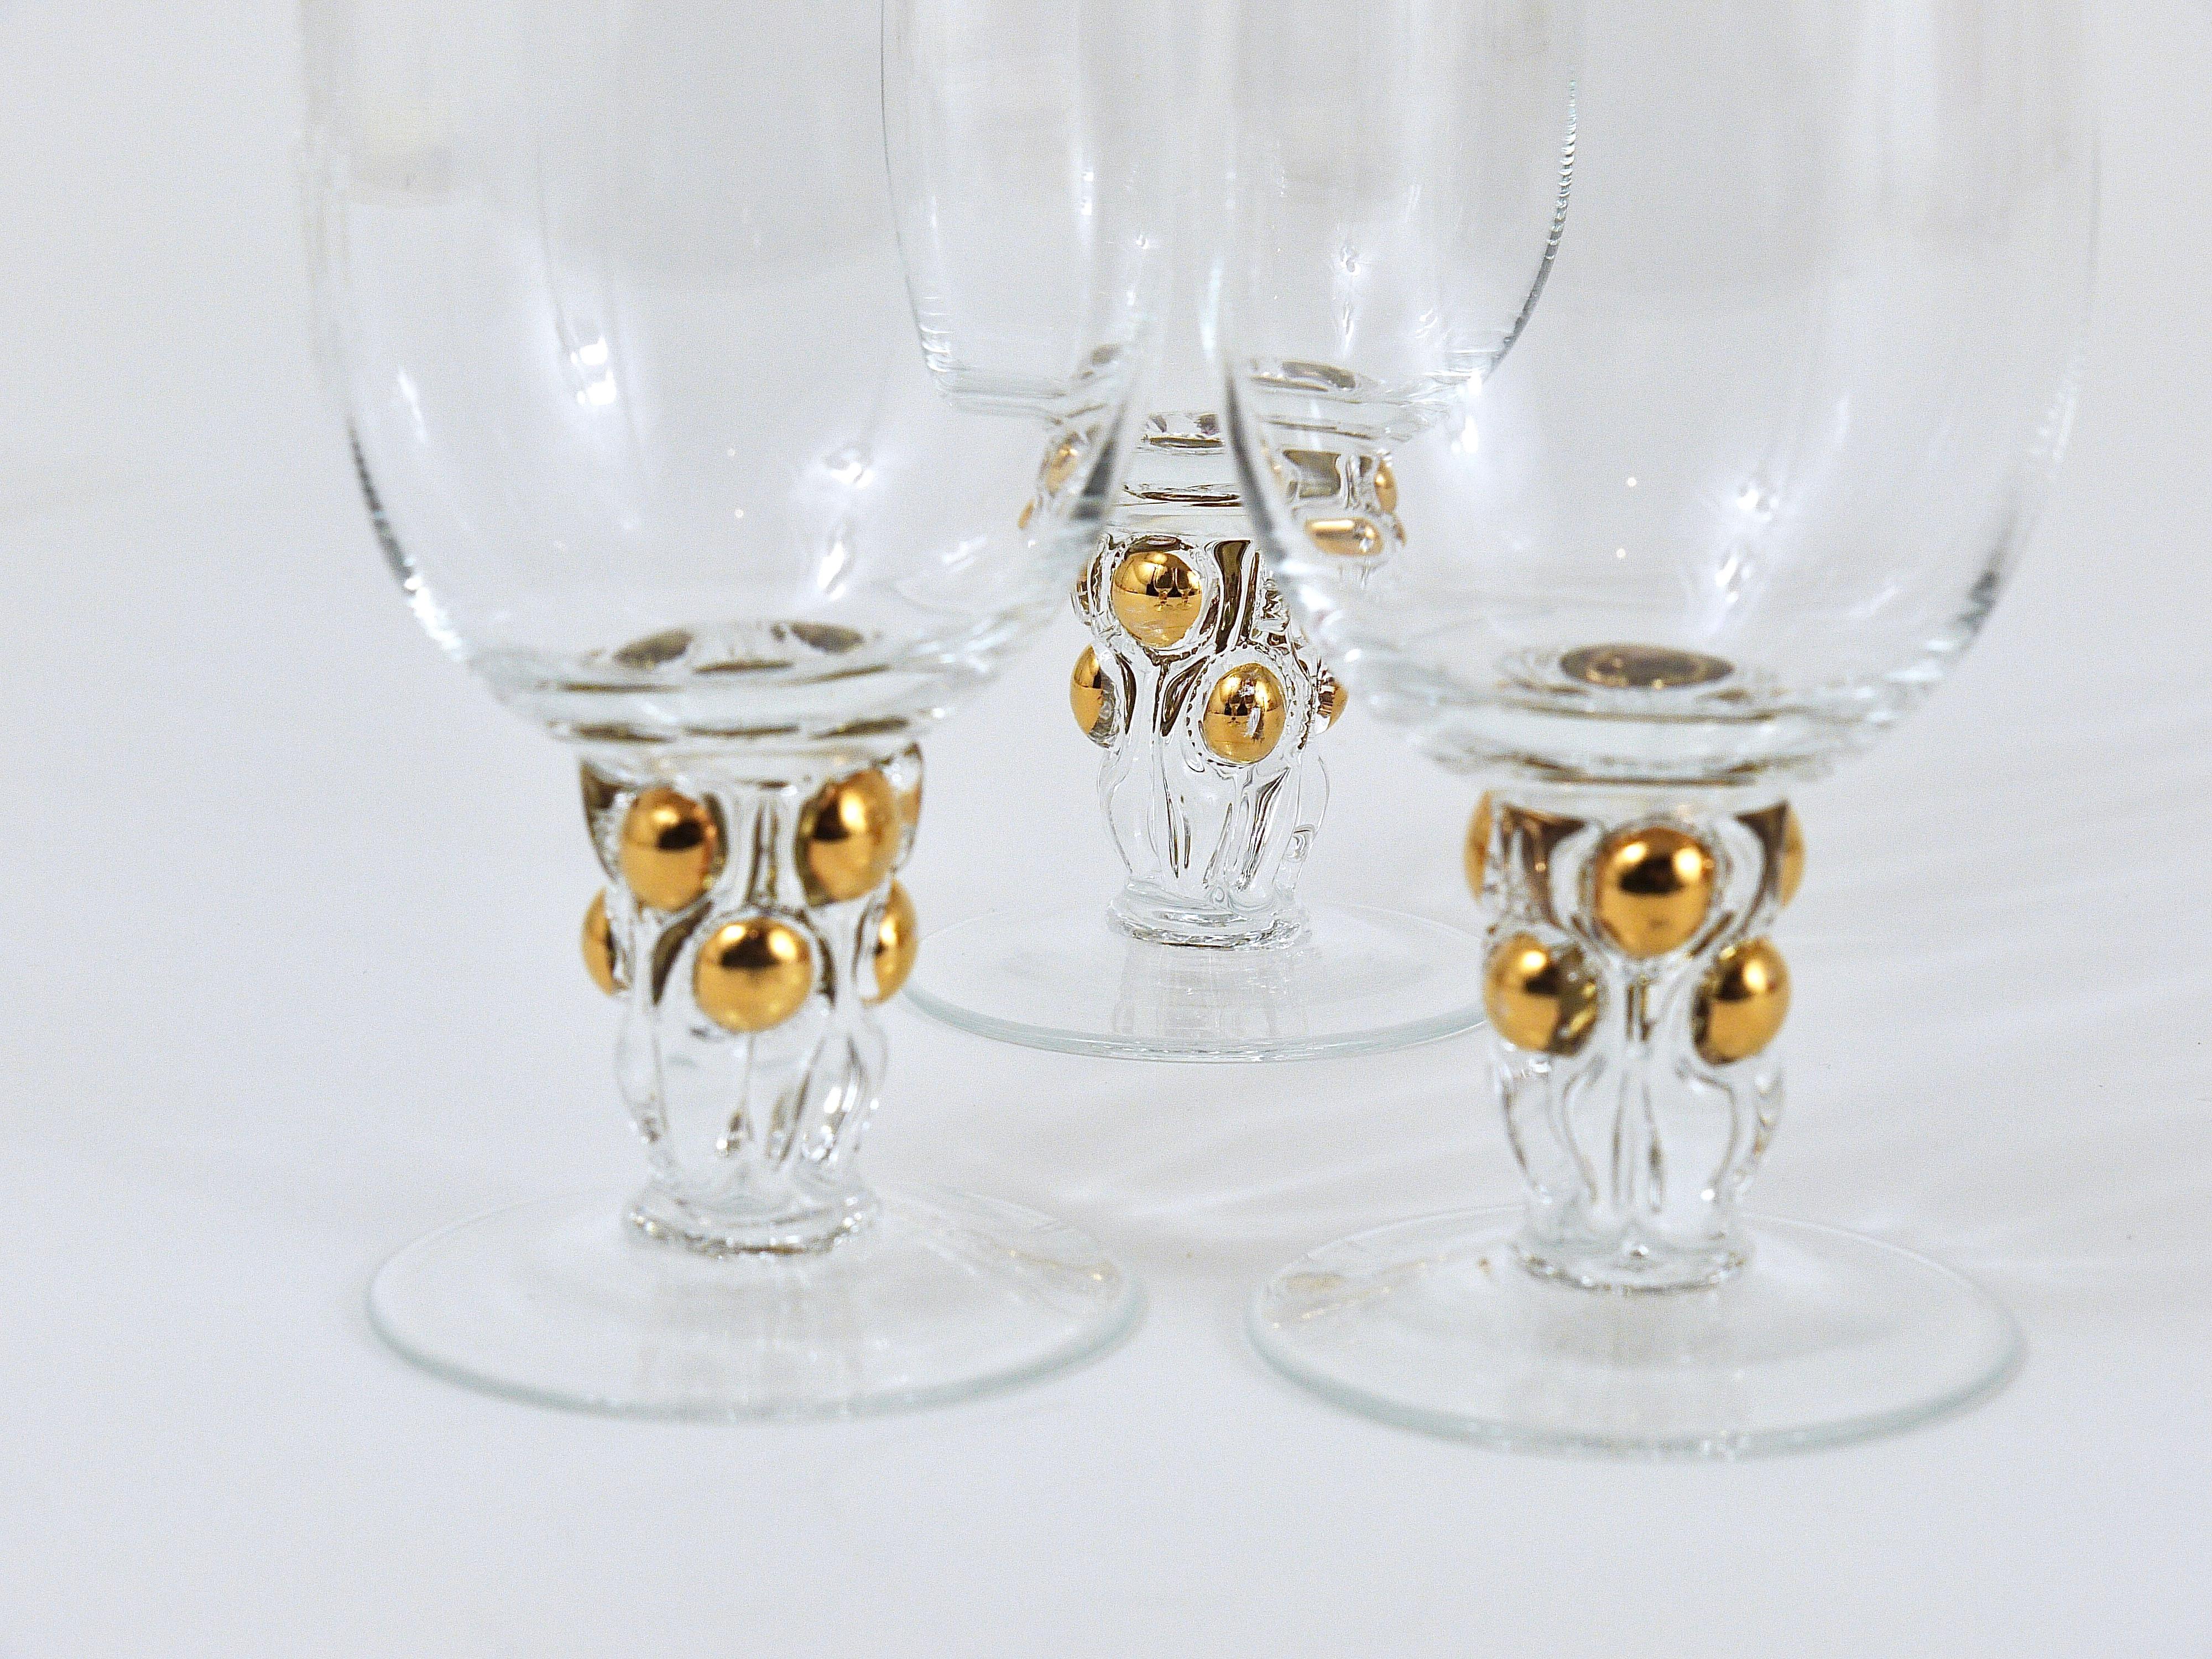 A set of six beautiful hand blown drinking glasses for water, soda or beer, made of clear glass with gold rim and golden balls in the stem. Made by Lyngby Glassworks in Denmark in the 1960s. In very good condition.